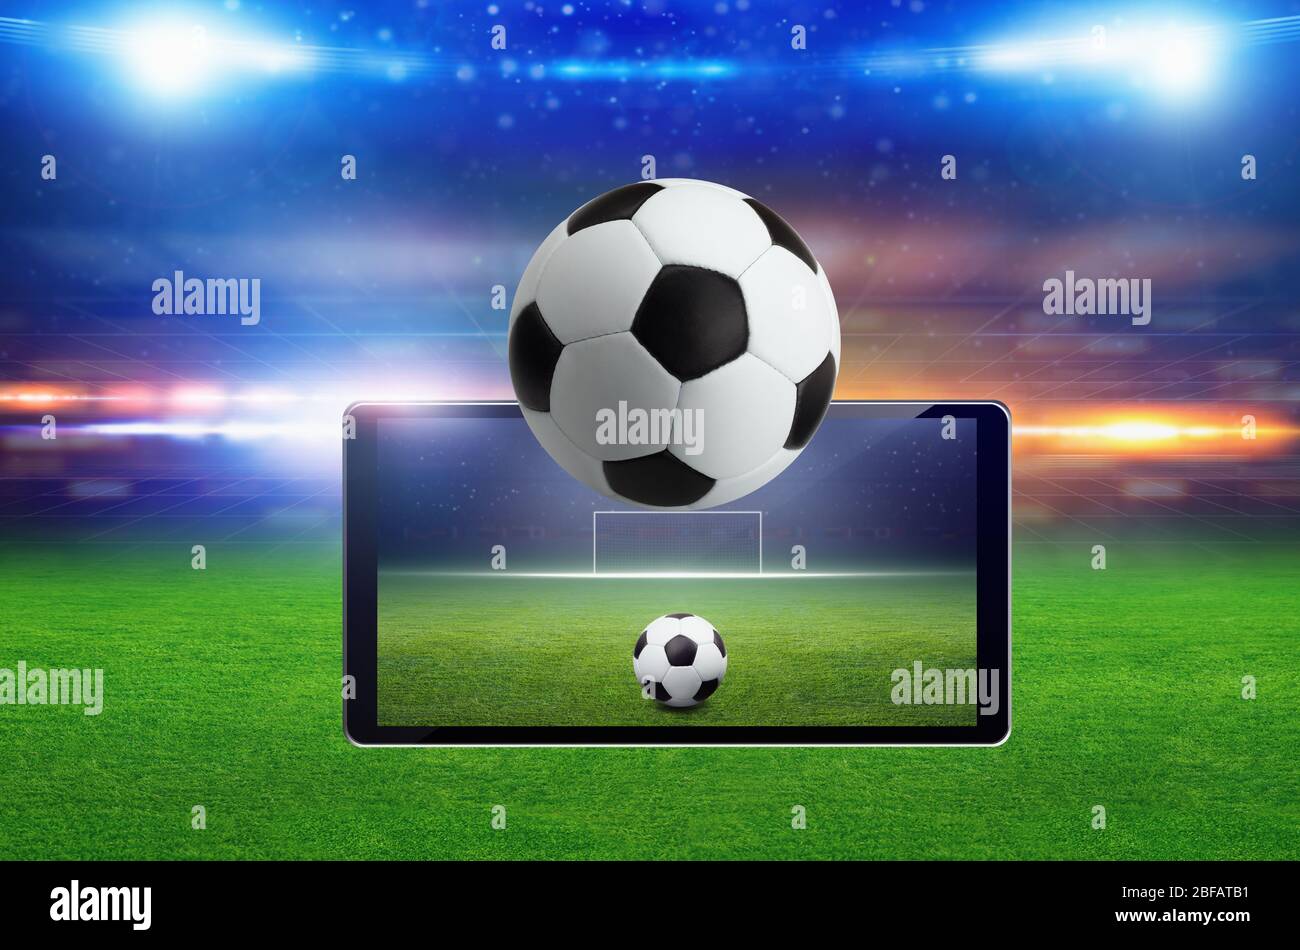 Abstract technological background - soccer game online concept, green soccer field illuminated bright spotlight, live streaming sports match Stock Photo